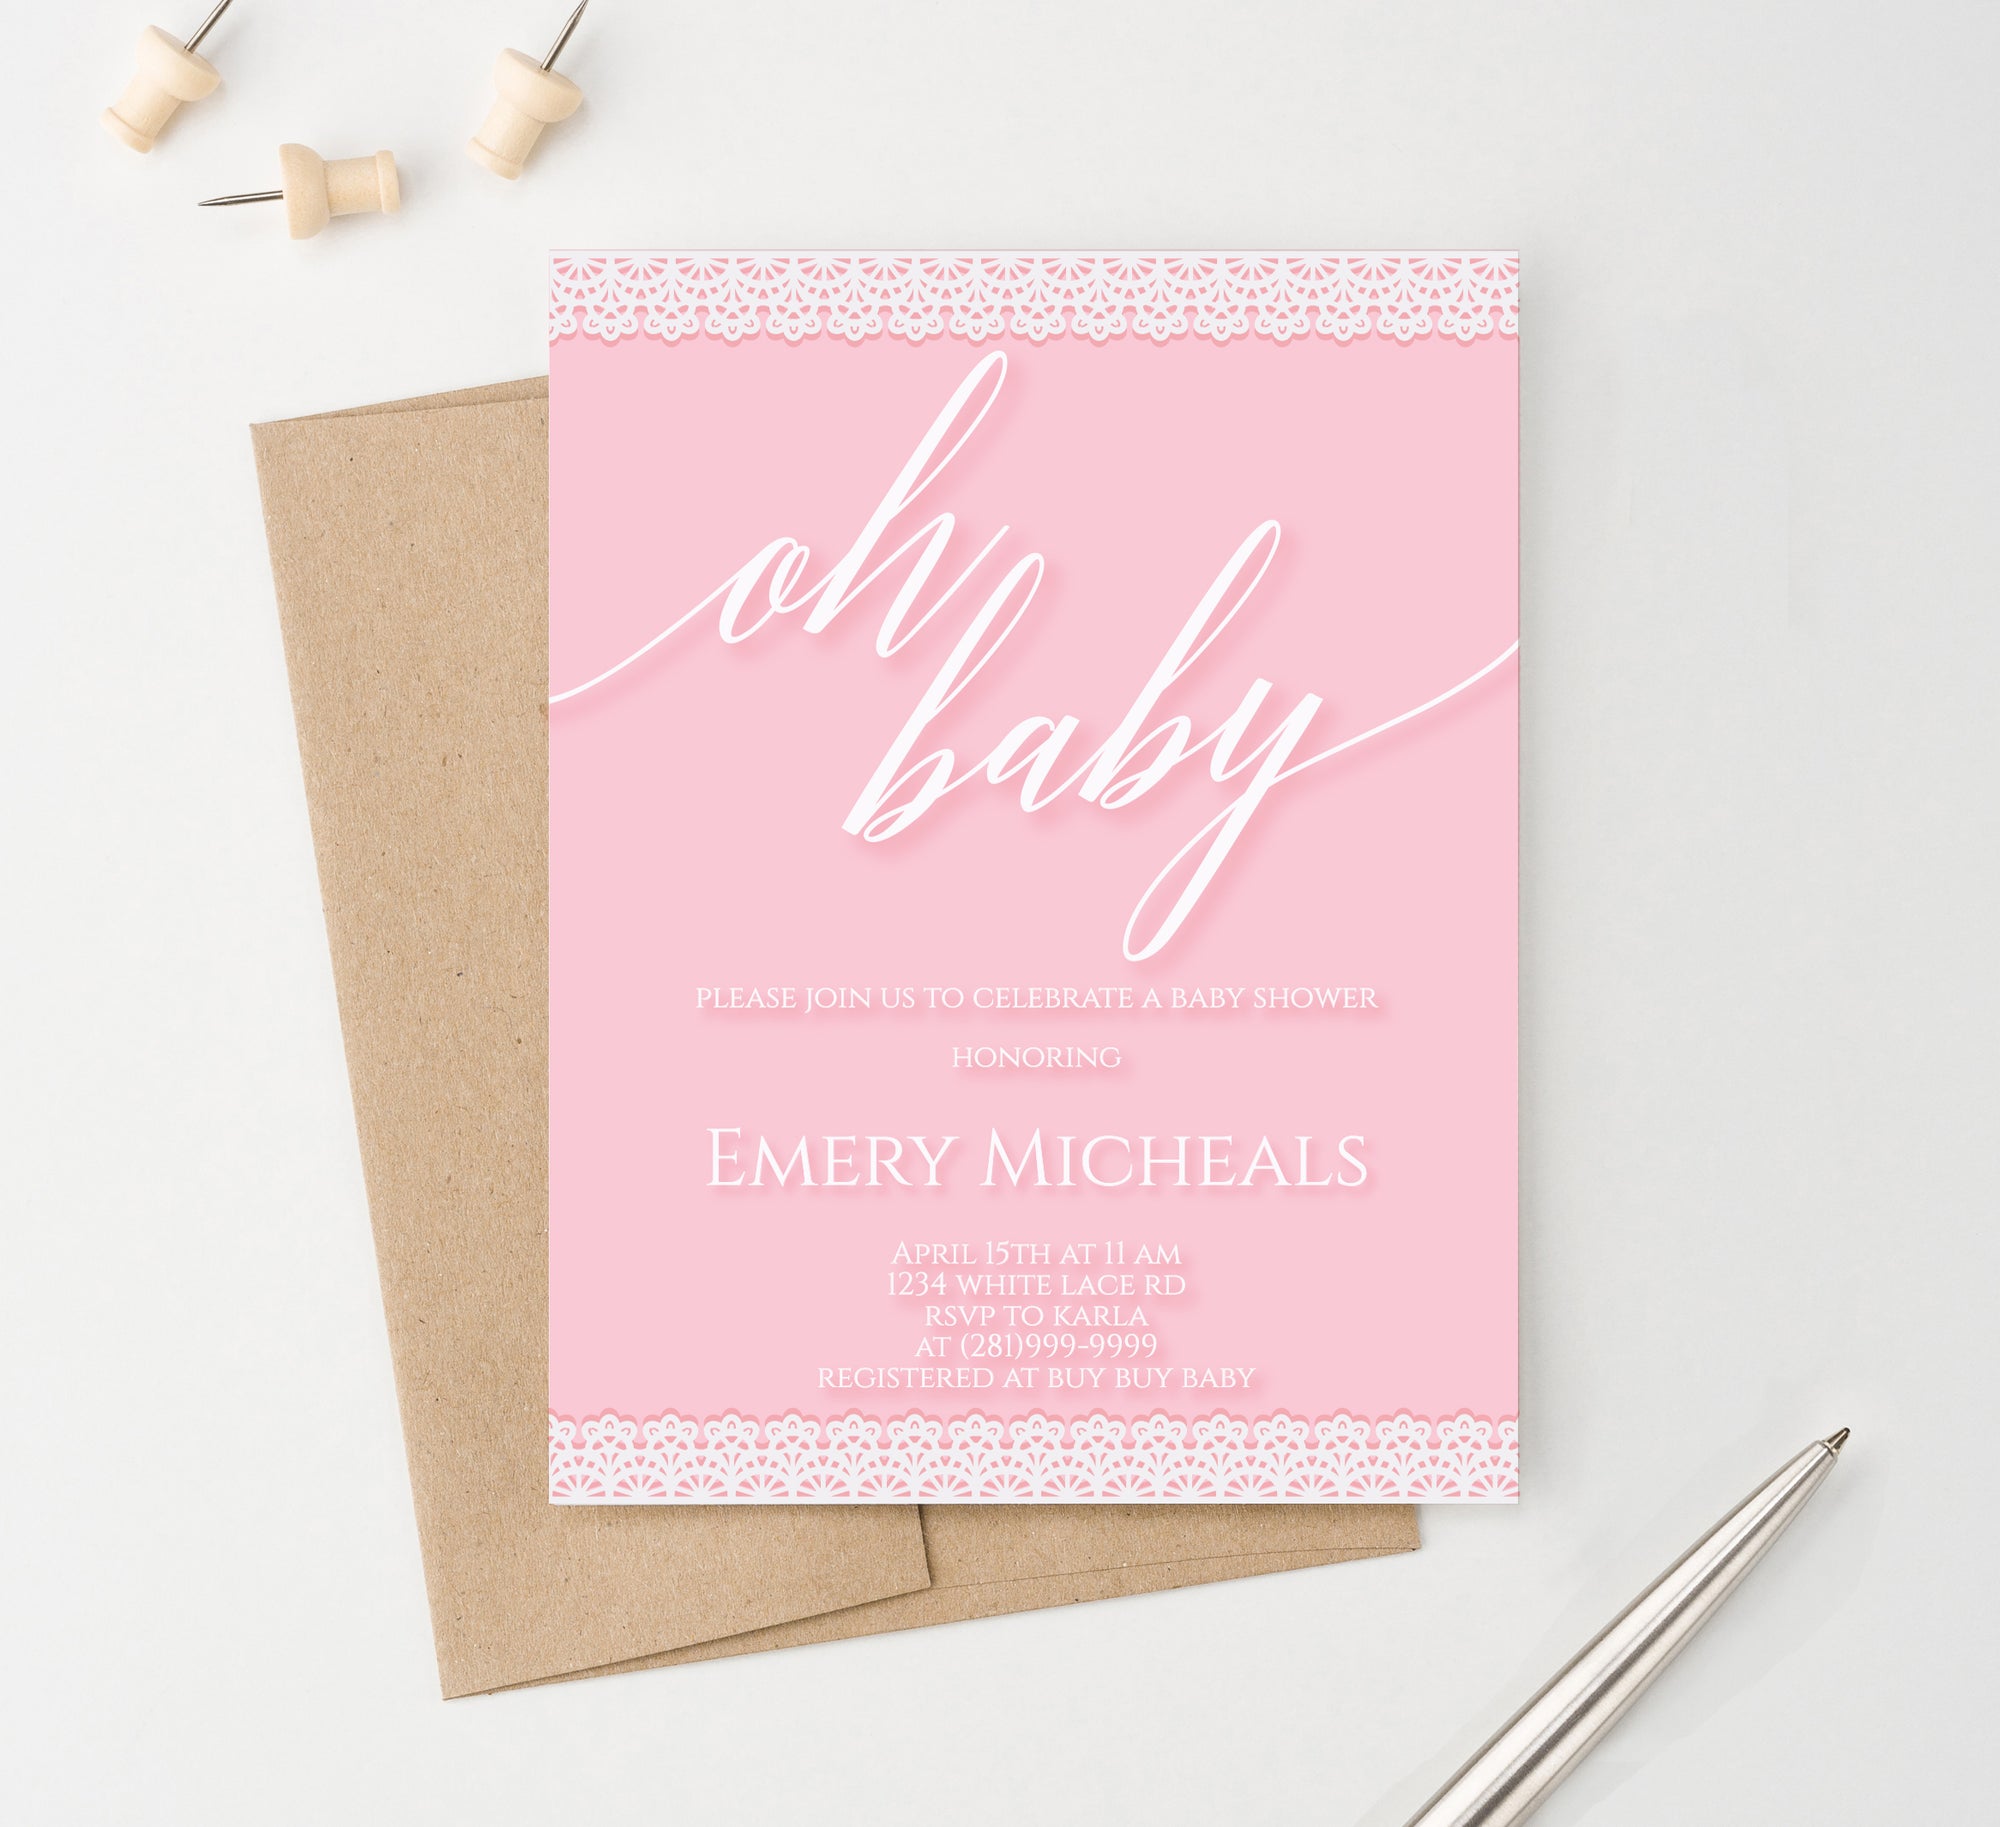 Personalized Pink With White Lace Baby Shower Invitations Girl